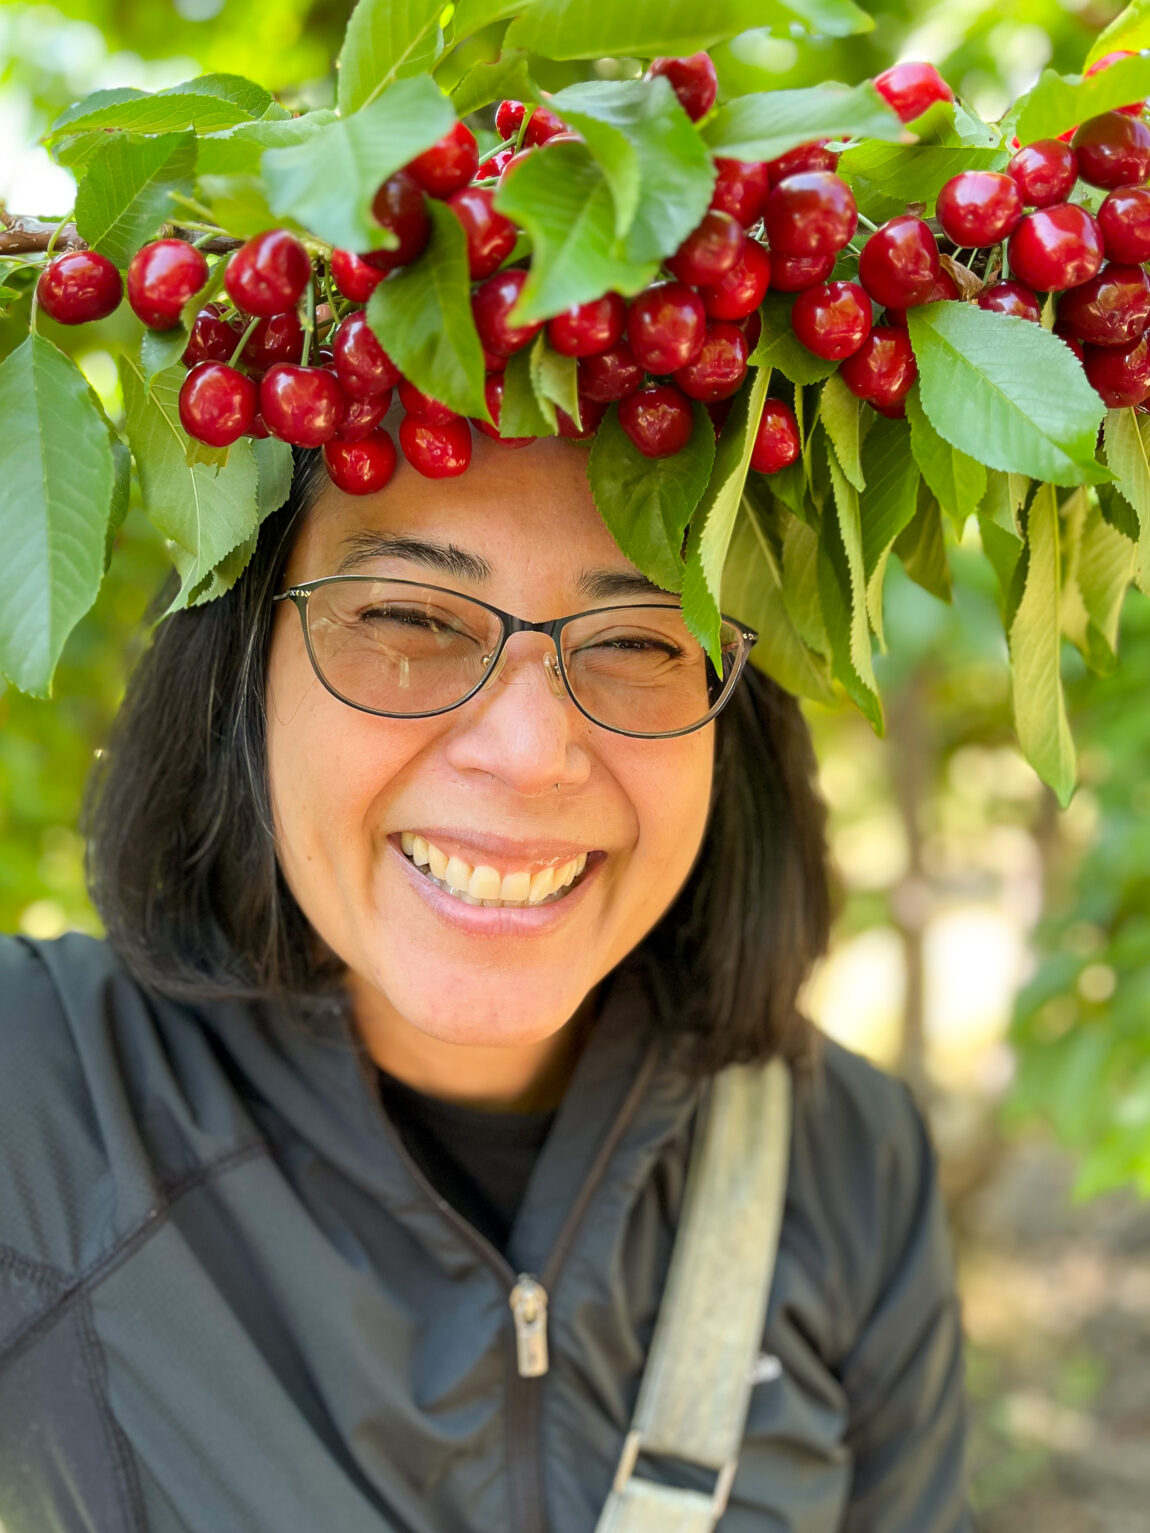 Woman smiling with a crown of cherries in a cherry farm